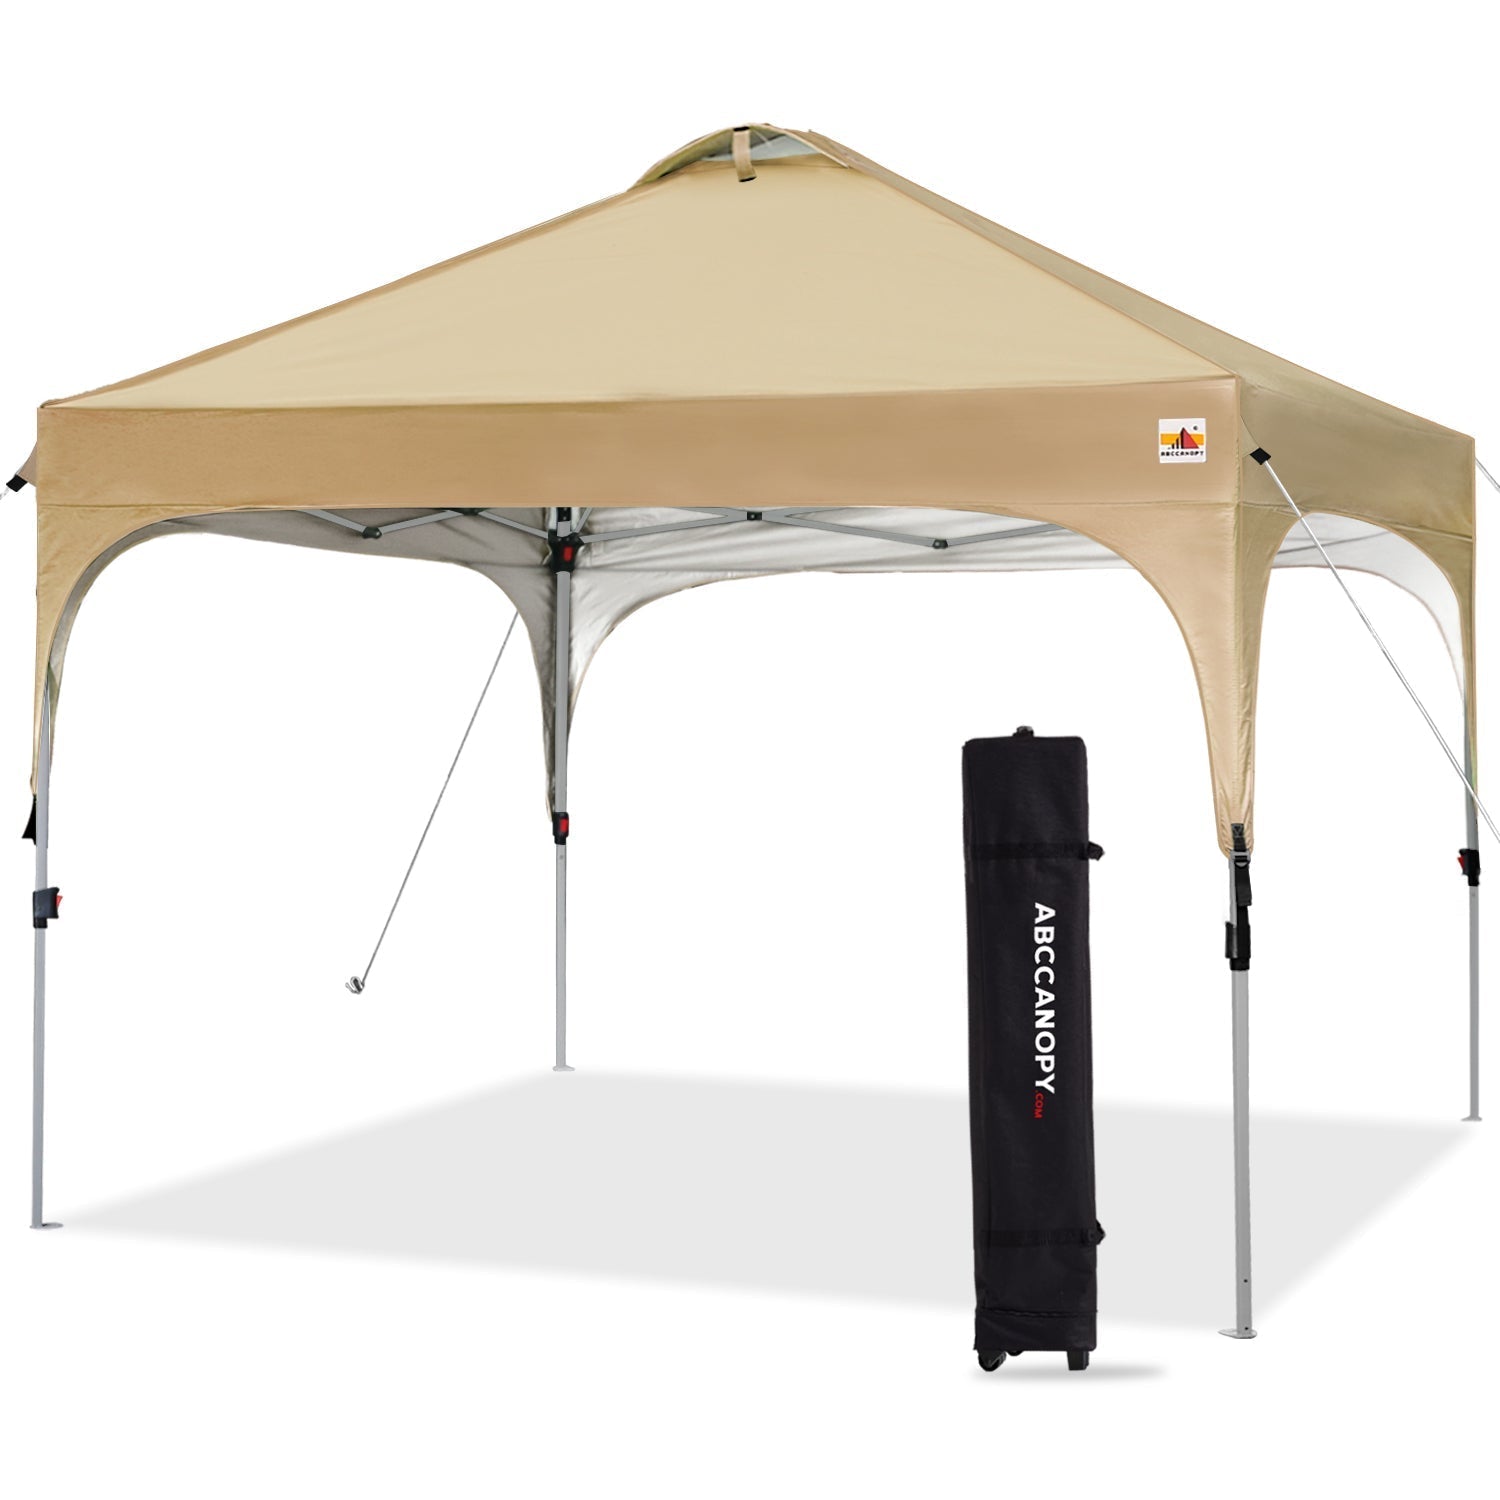 Compact Pop-up Instant Portable Canopy 10x10 for Camping, Beach